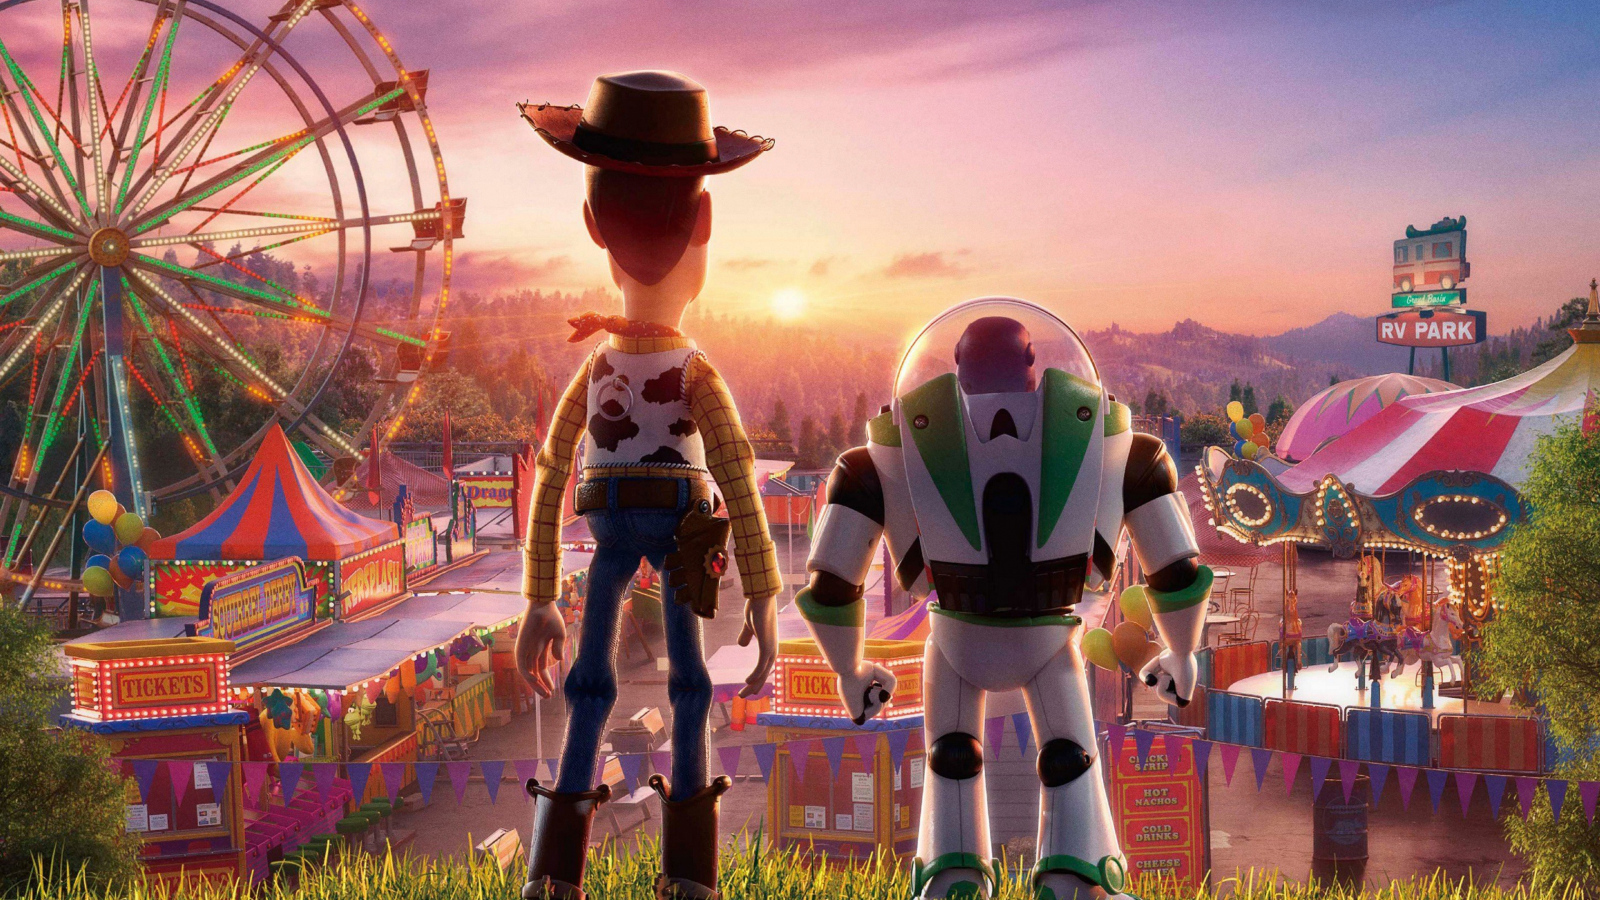 Characters Sheriff Woody and Buzz Lightyear Cartoon Toy Story 4, 2019